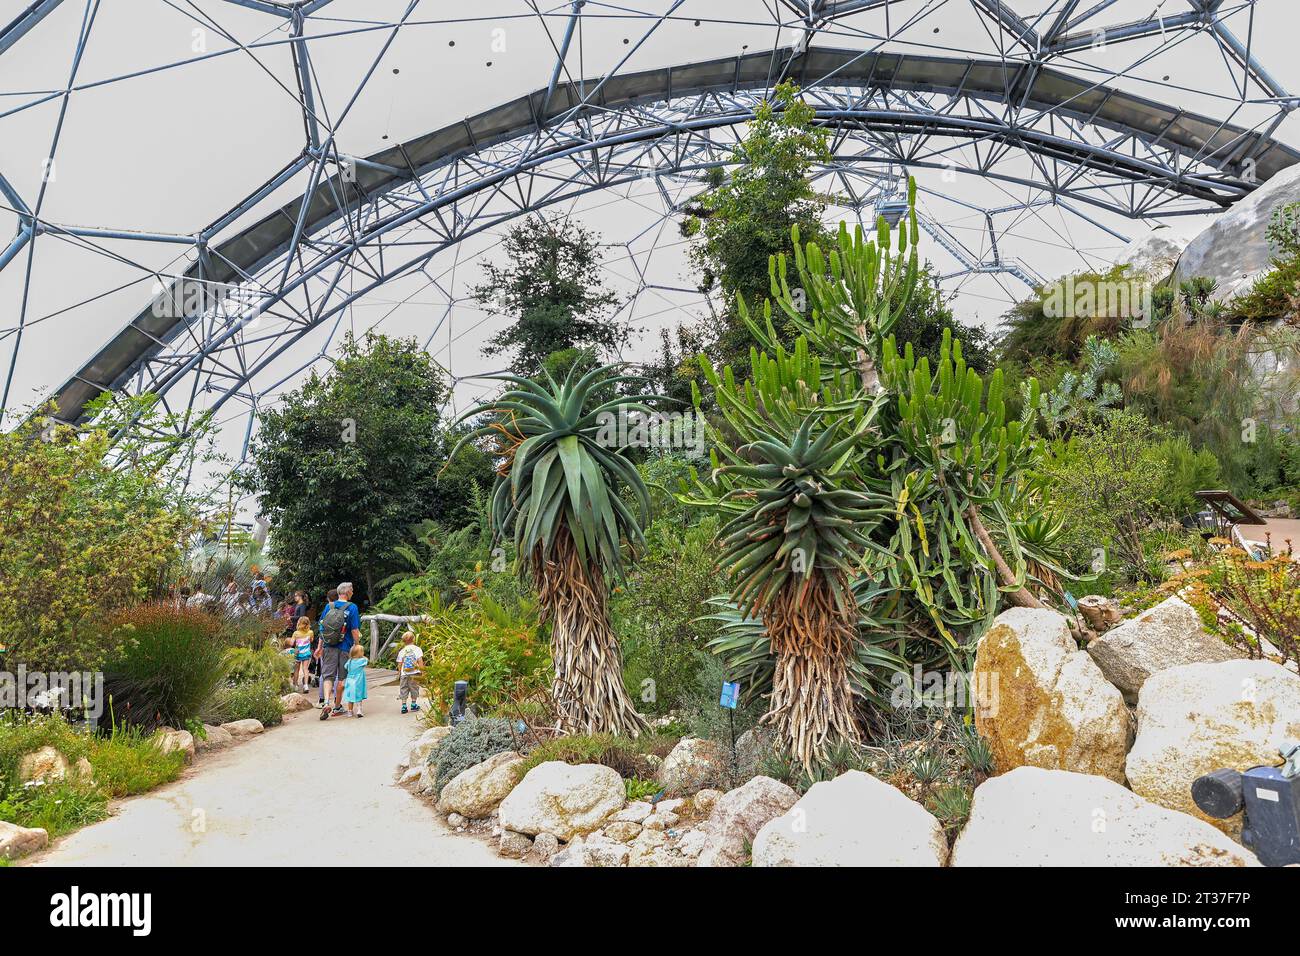 Inside the Mediterranean Biome at the Eden Project, a visitor attraction near St Austell, Cornwall, England, United Kingdom UK Stock Photo